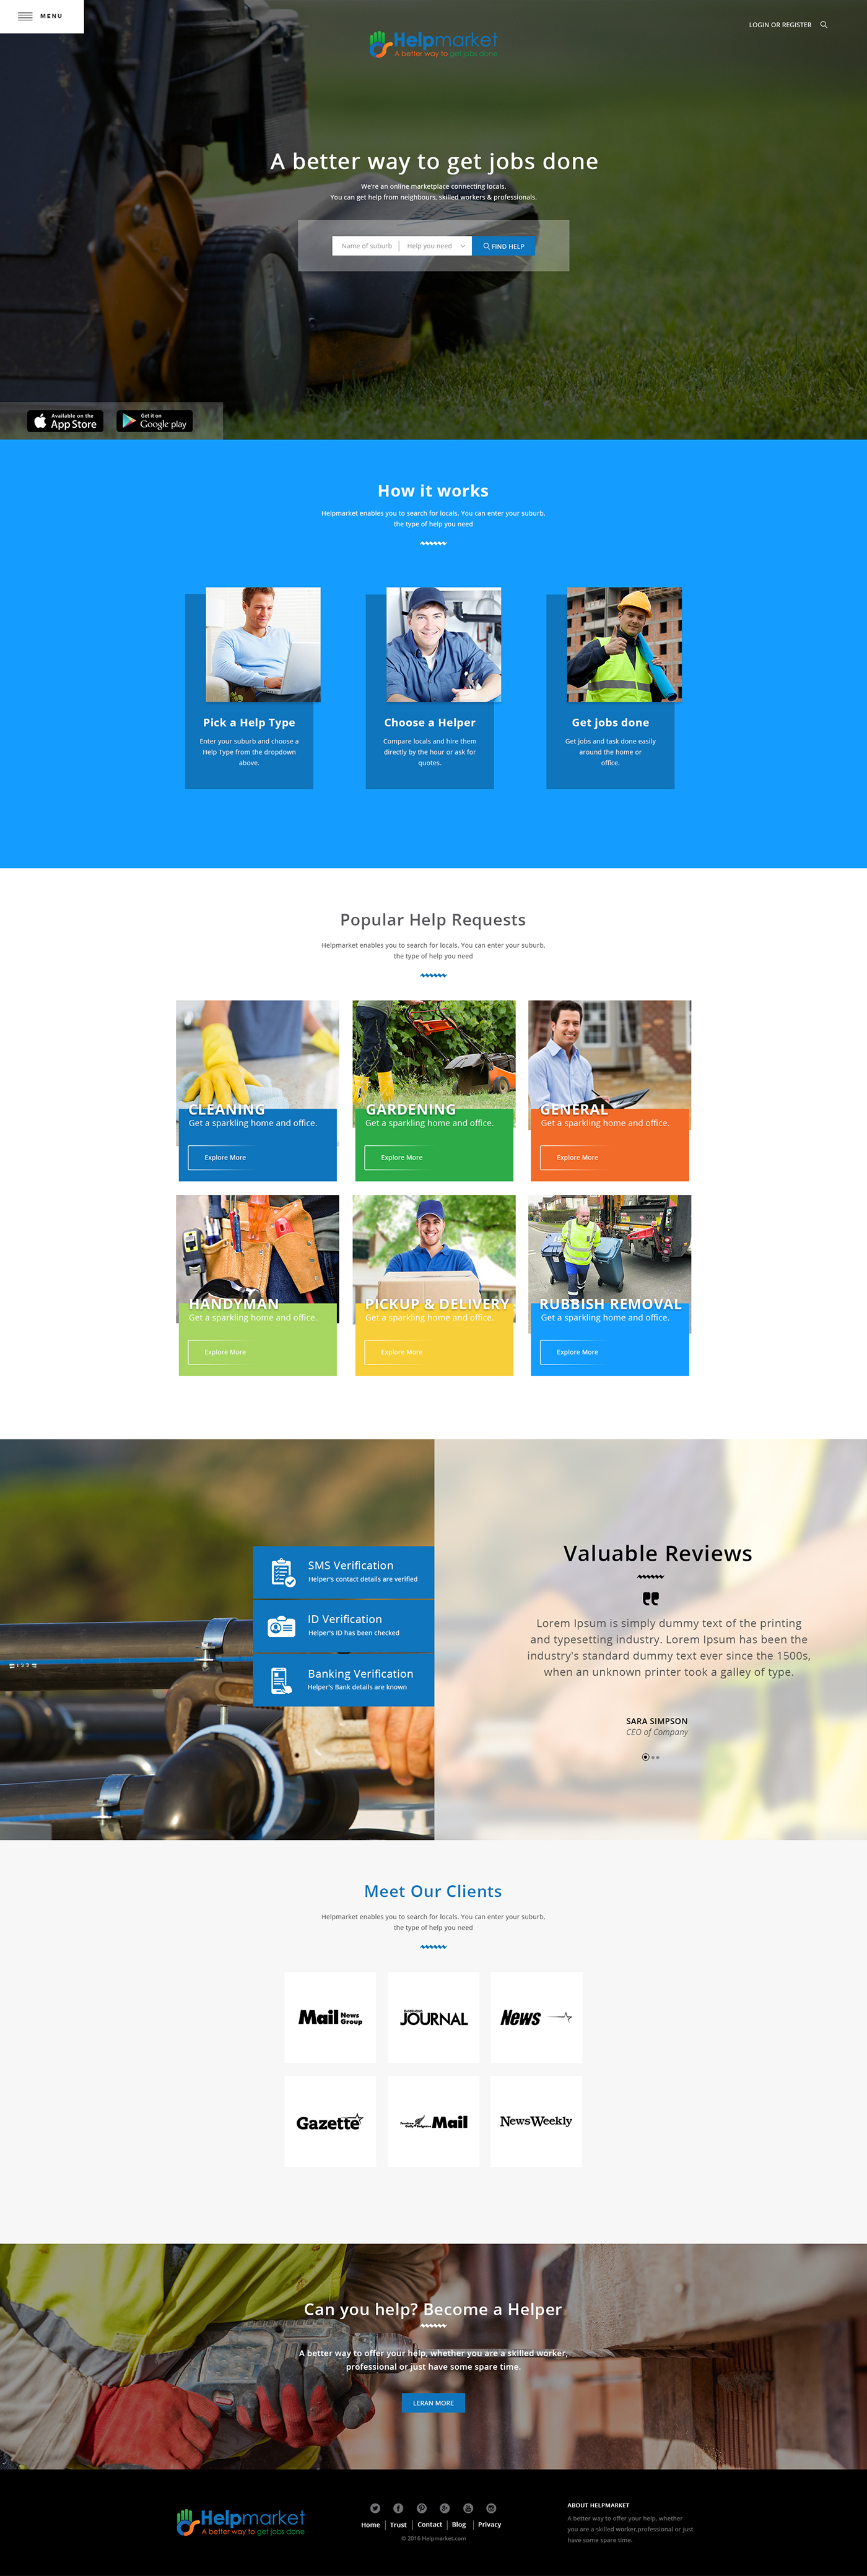 Web Design  UI ux help service Jobs cleaning gardening handyman pickup&delivery